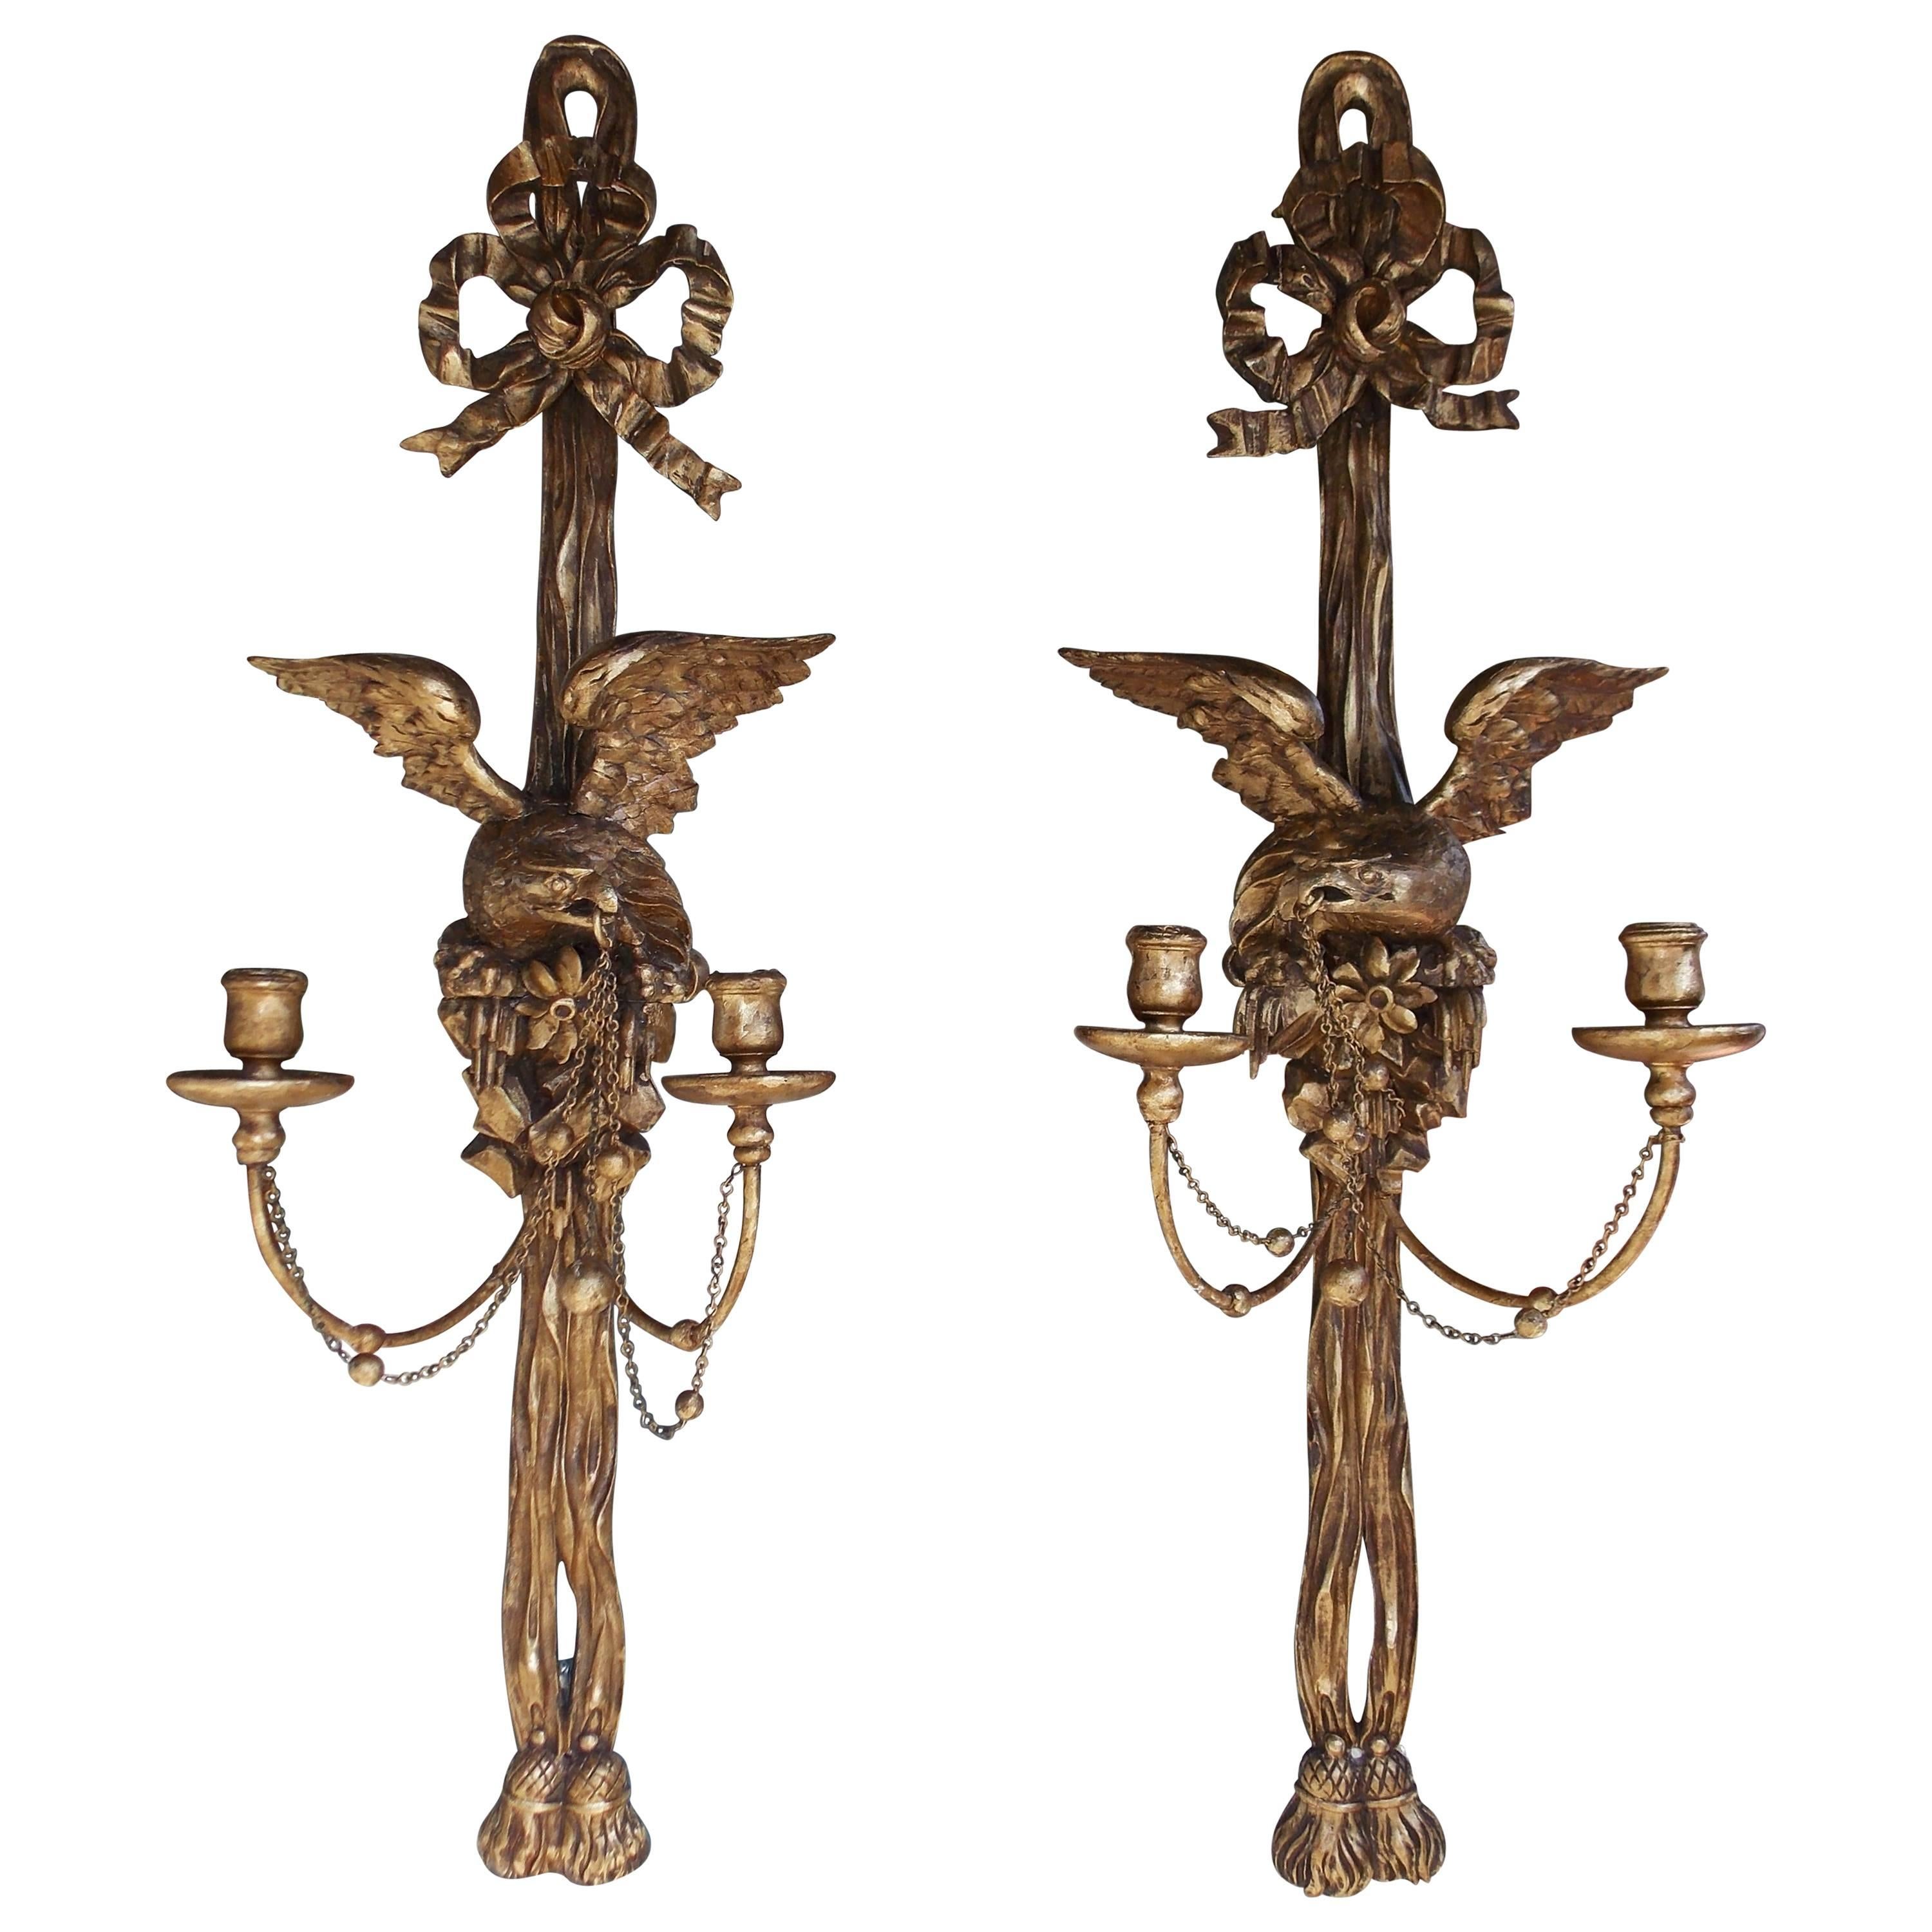 Pair of American Gilt Perched Eagle Wall Sconces, Circa 1810